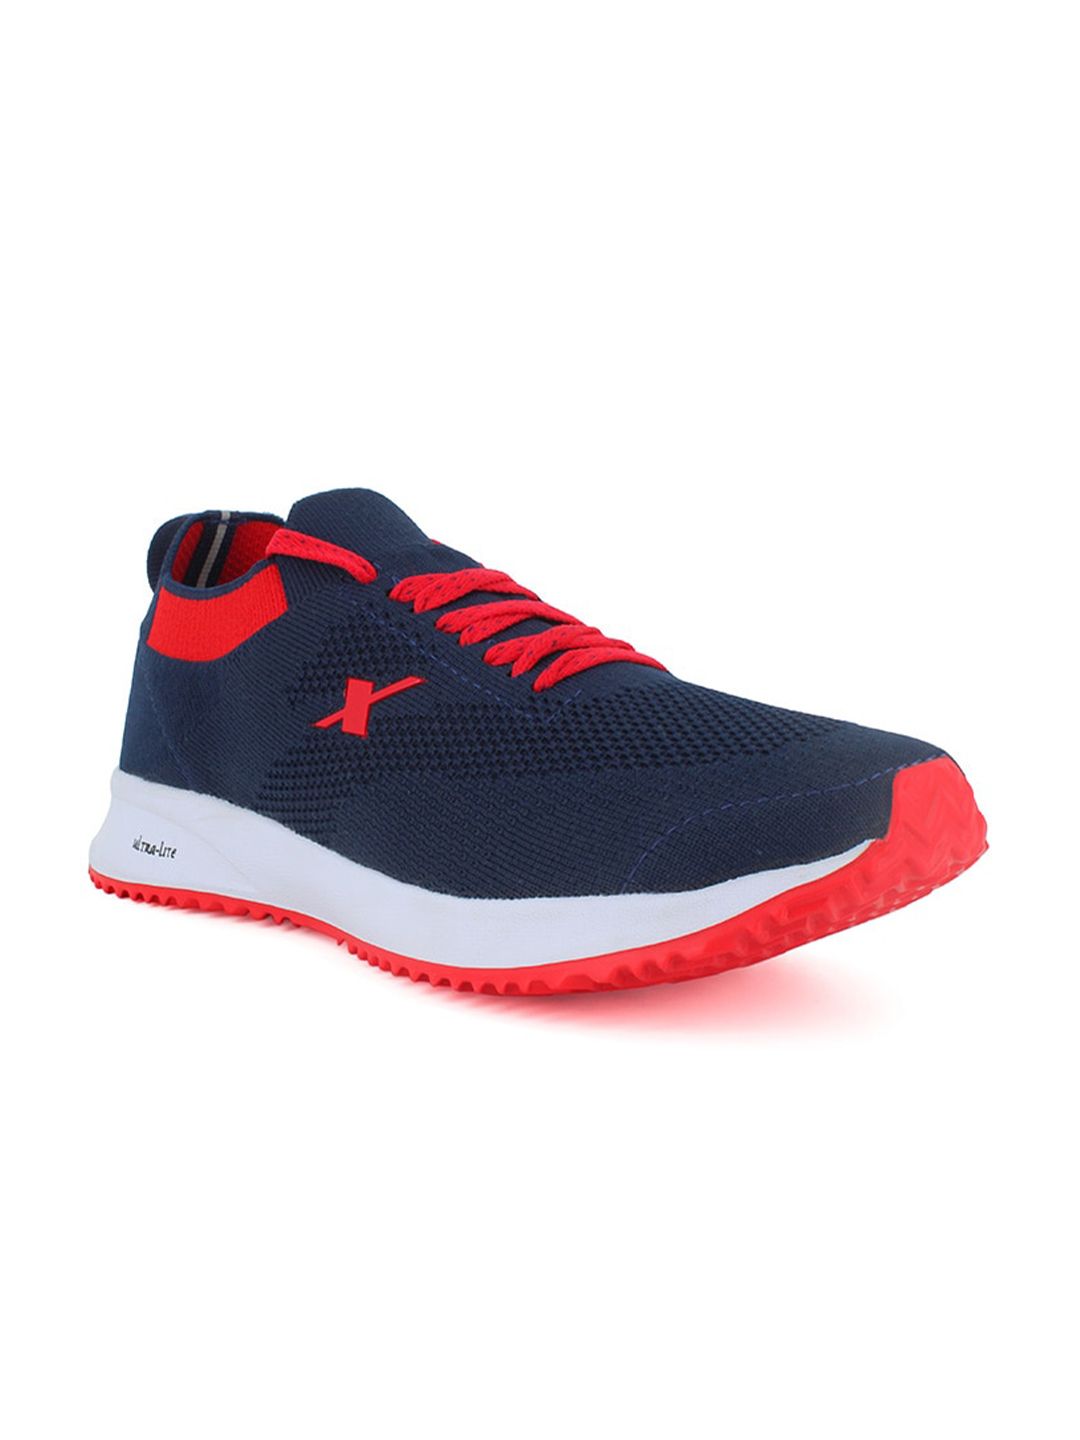 Sparx Women Textile Running Non-Marking Shoes Price in India